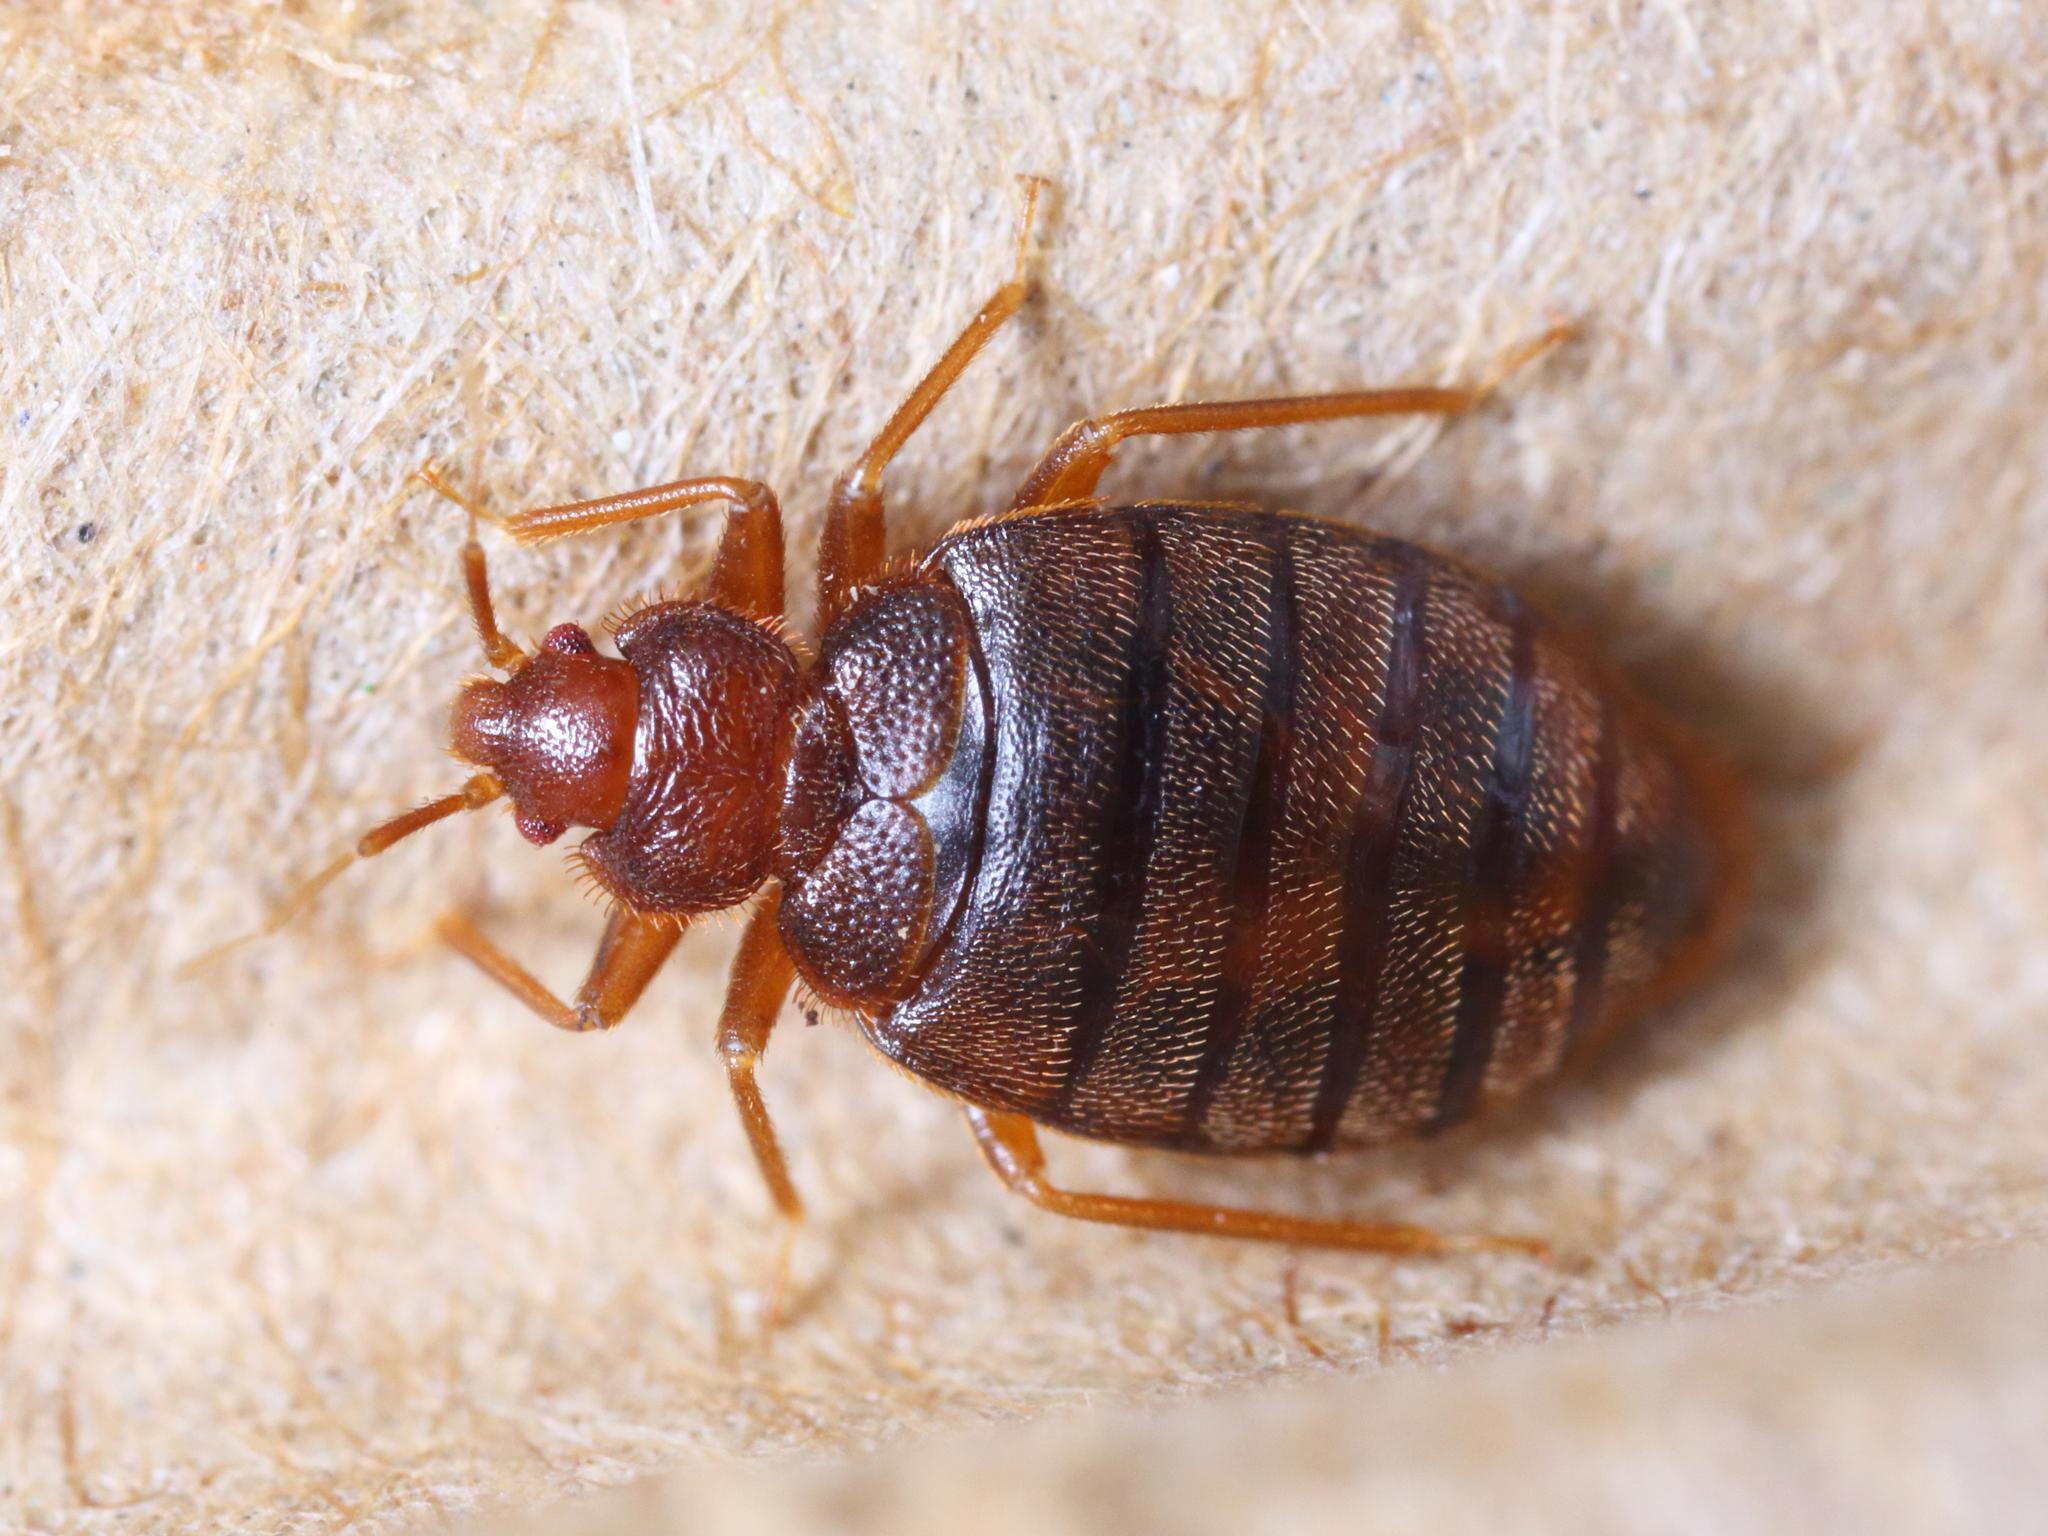 A wave of panic and disgust was sparked in Paris and other French cities when people started posting videos on social media of bedbugs on public transport